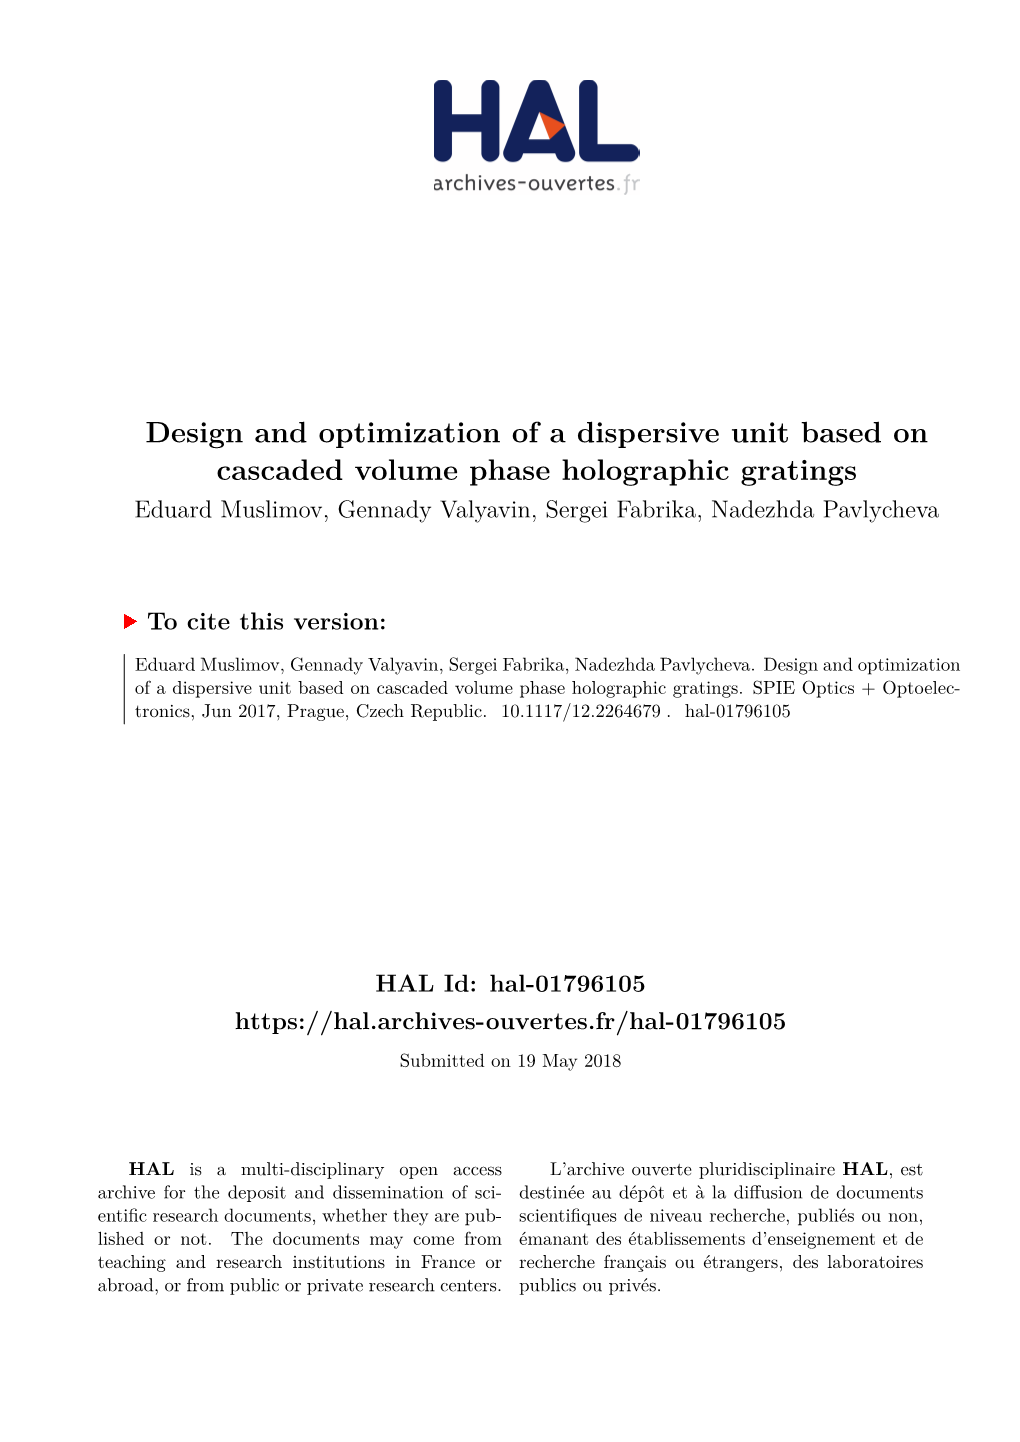 Design and Optimization of a Dispersive Unit Based on Cascaded